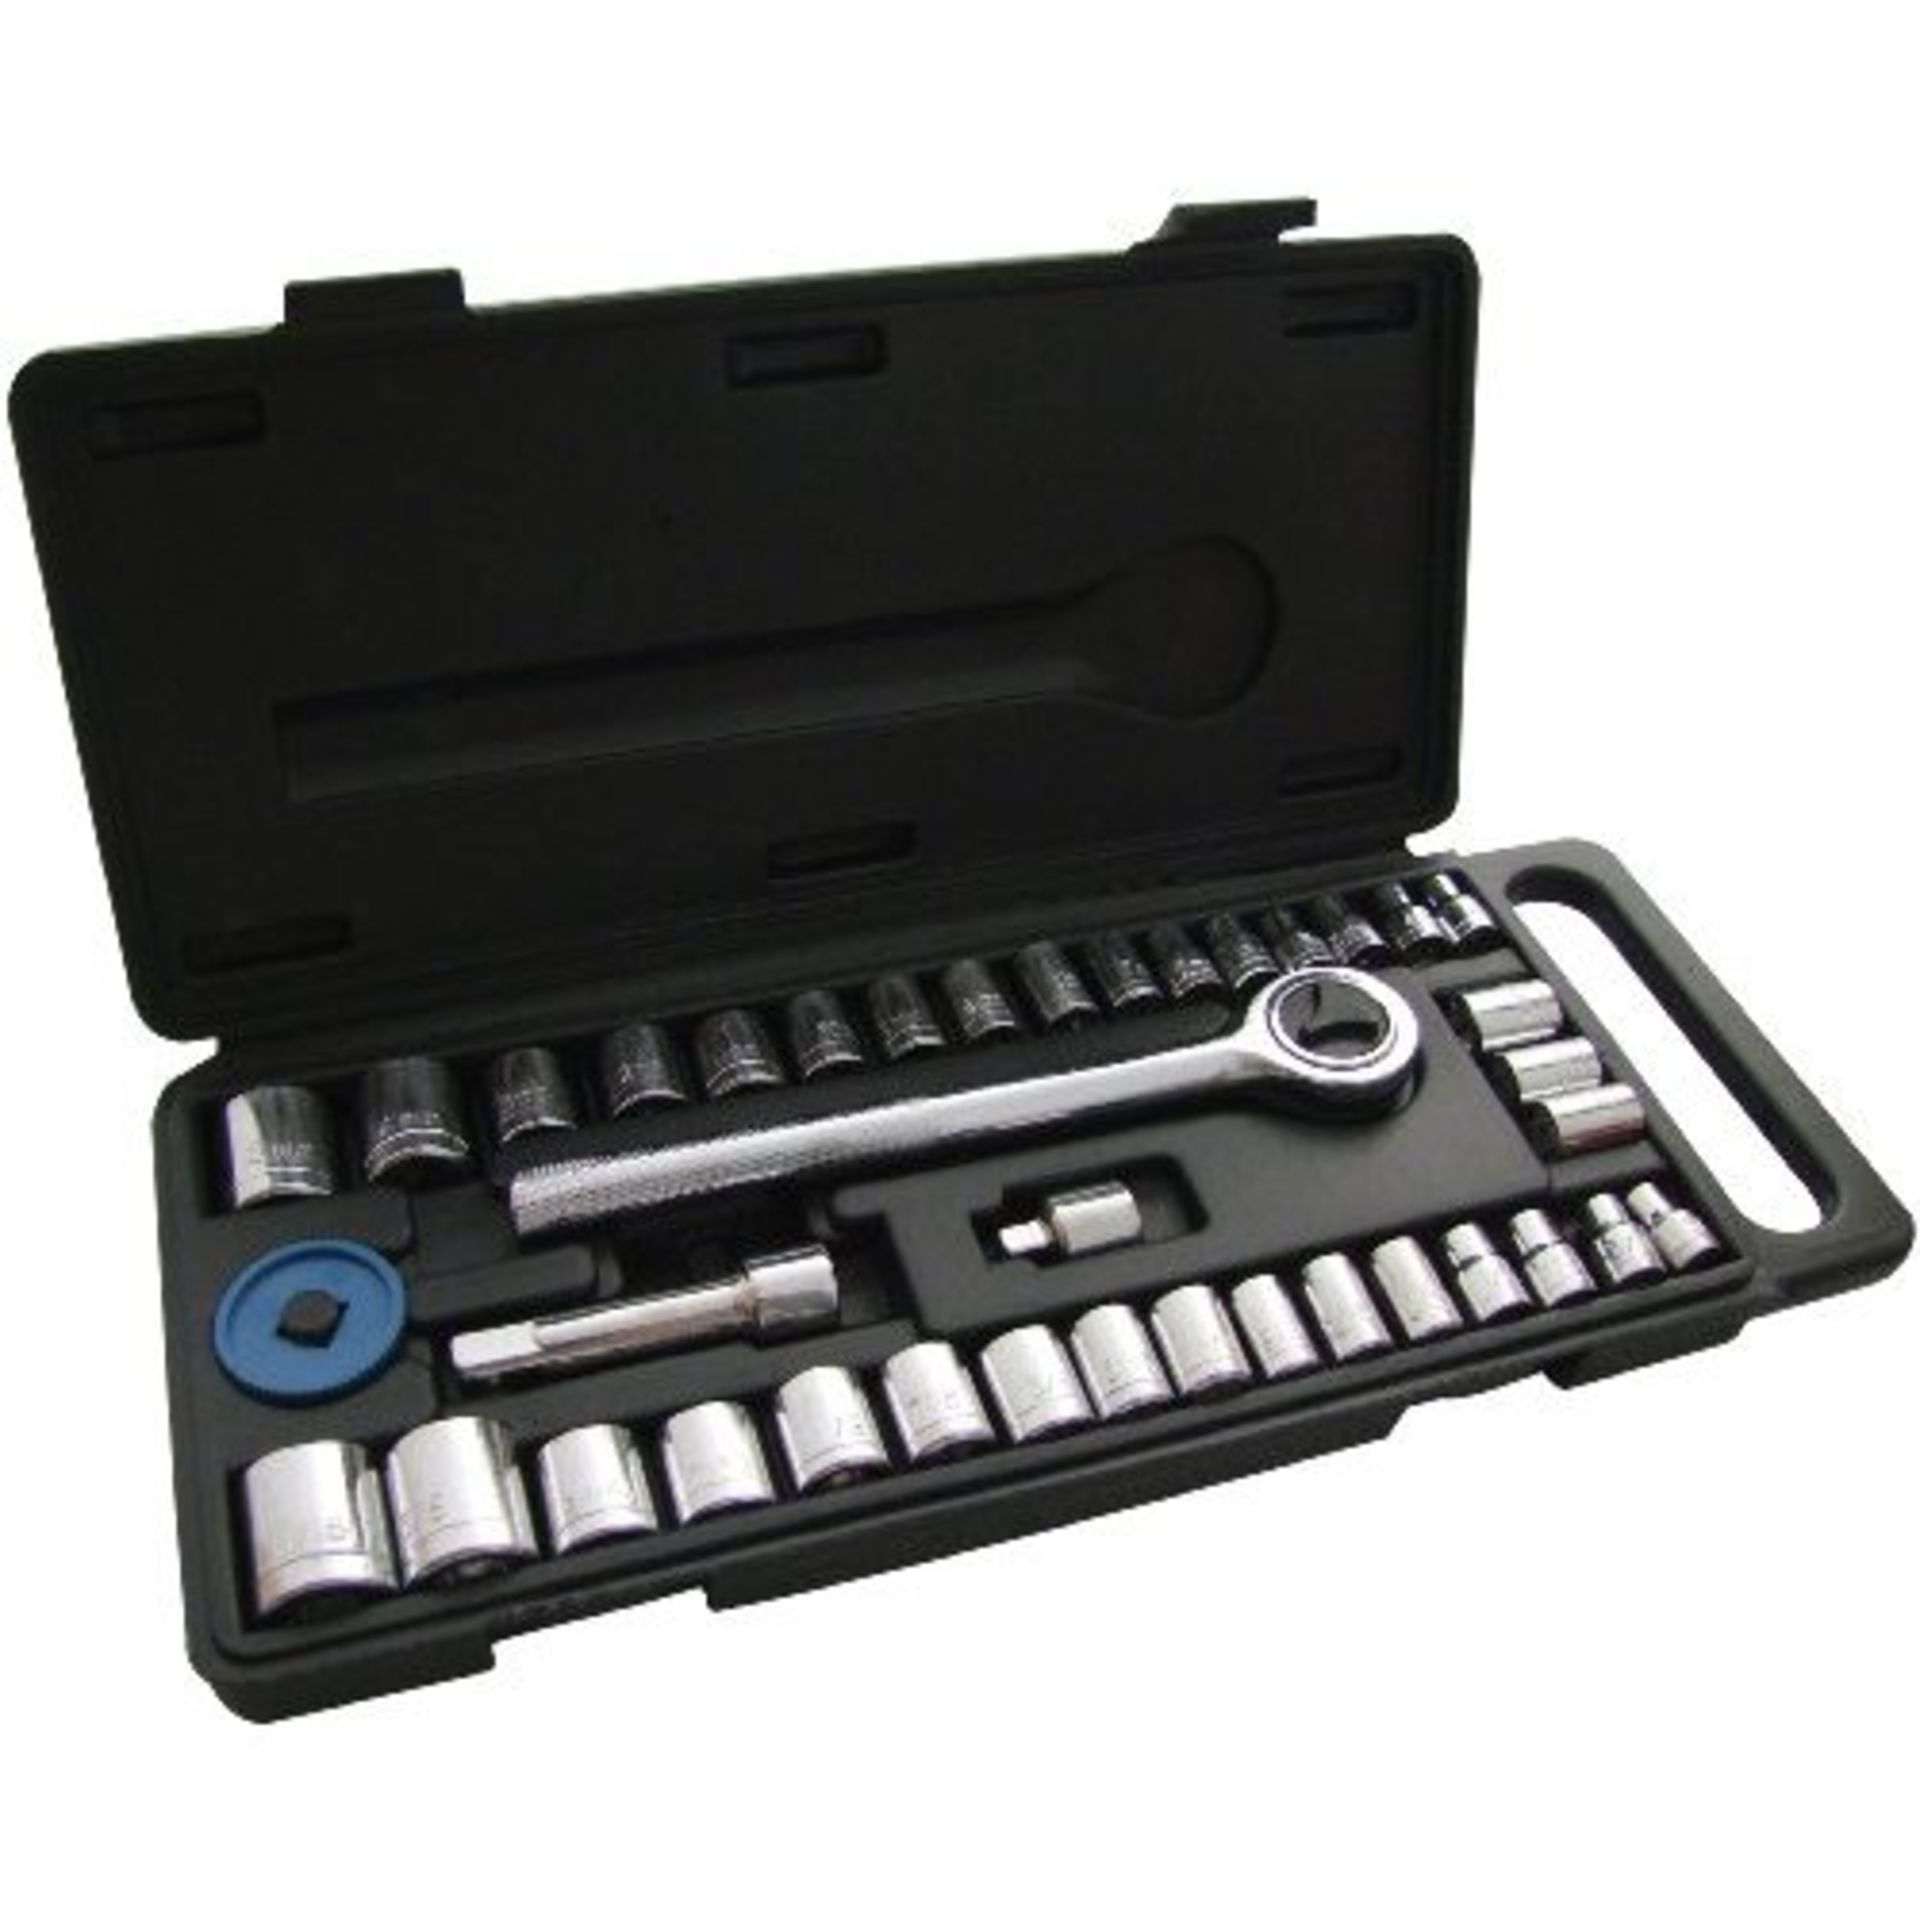 V *TRADE QTY* Brand New 40 Piece 1/4" and 3/8" Drive Chrome Plated Socket Set X901 YOUR BID PRICE TO